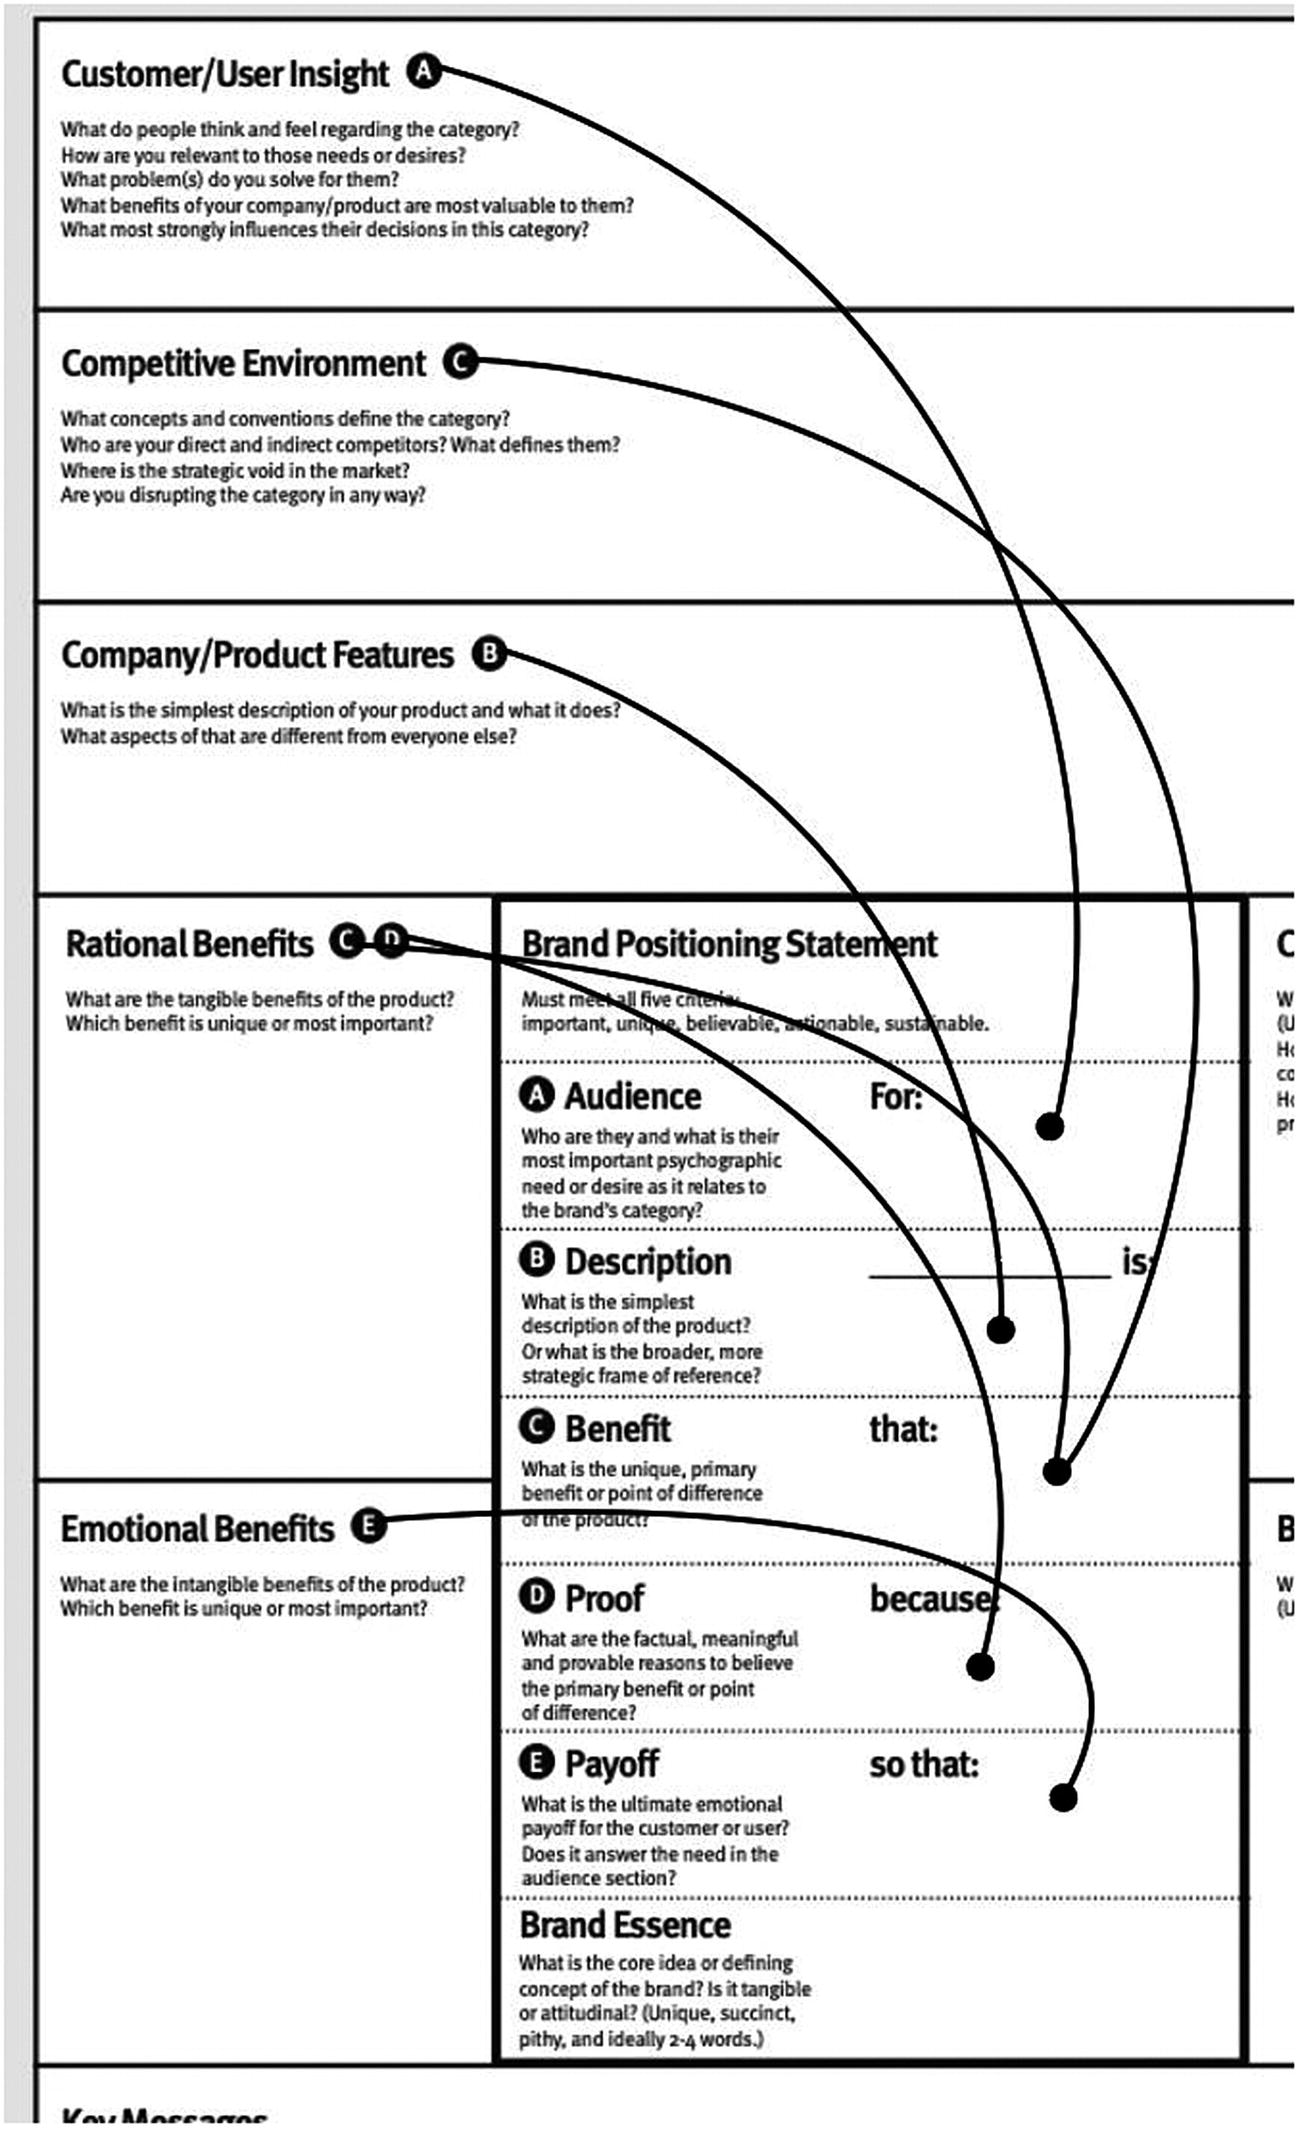 Overview of the Brand Strategy Canvas | SpringerLink